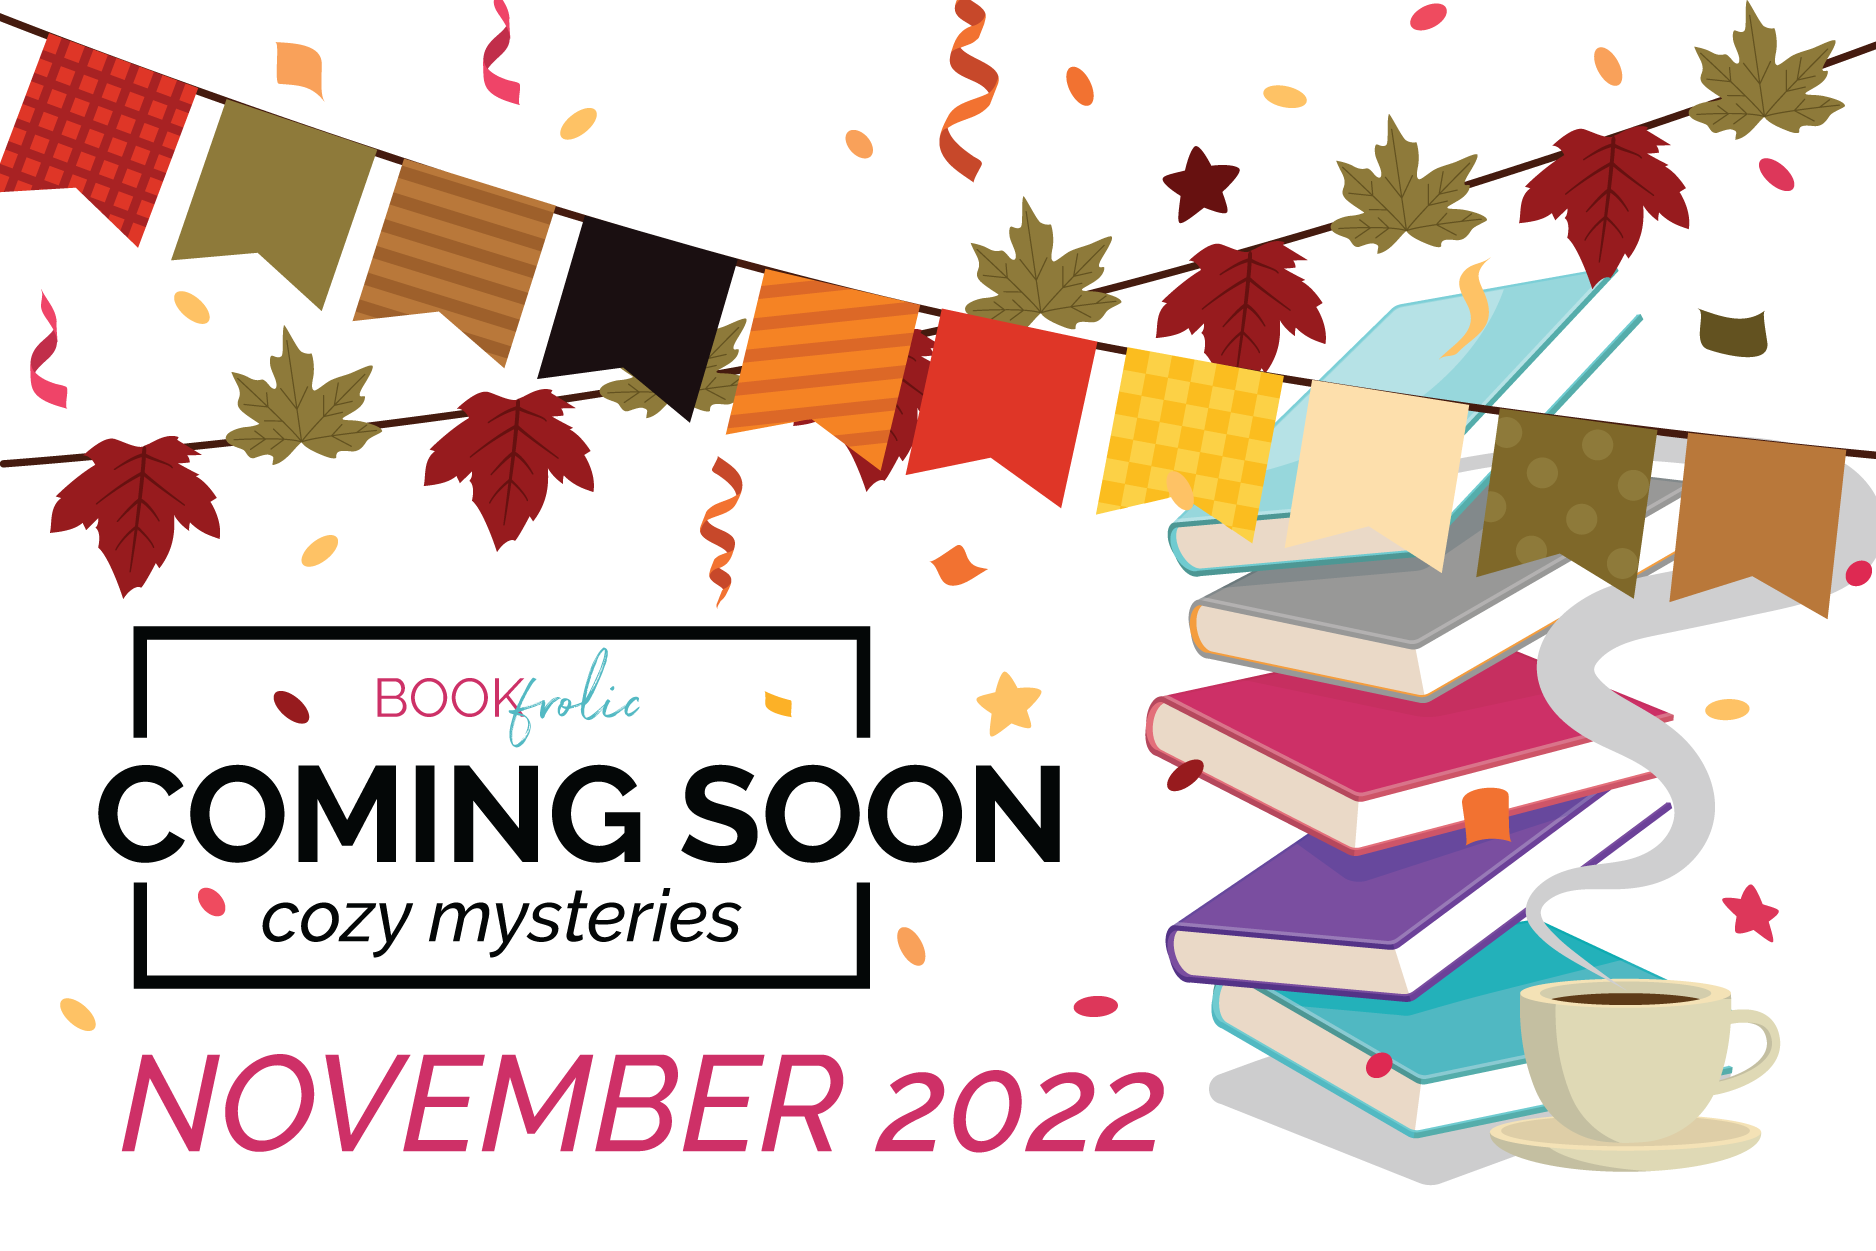 Coming soon - cozy mystery new releases in November 2022